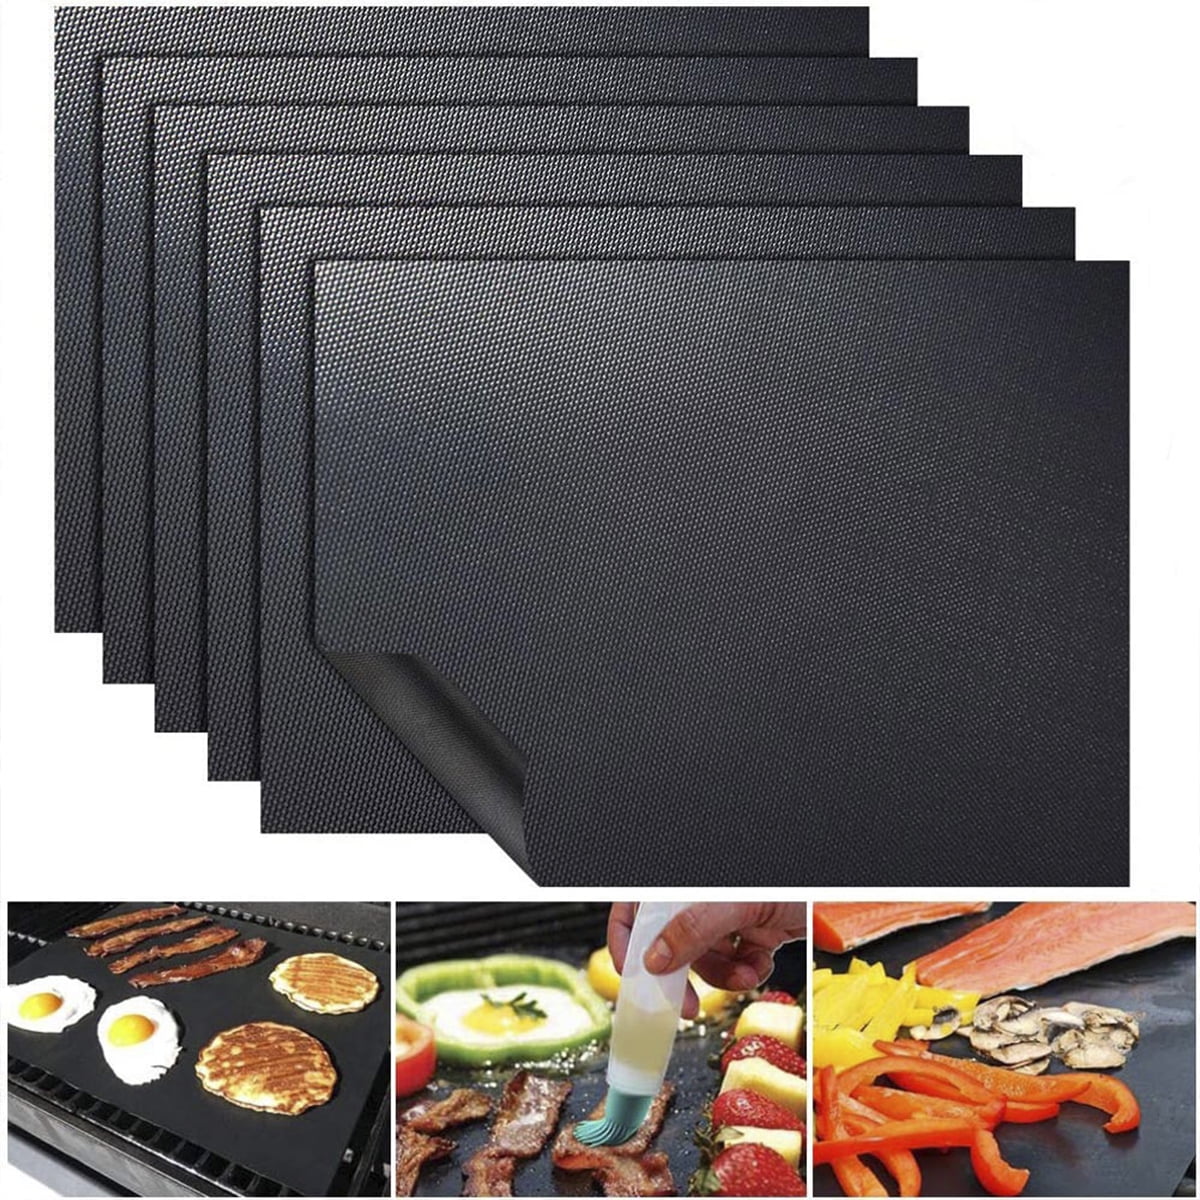 Atopoler 6Pcs Grill Mat Set Non-Stick BBQ Grill Mats Reusable Easy to Clean - 15.75 x 13inch, Black